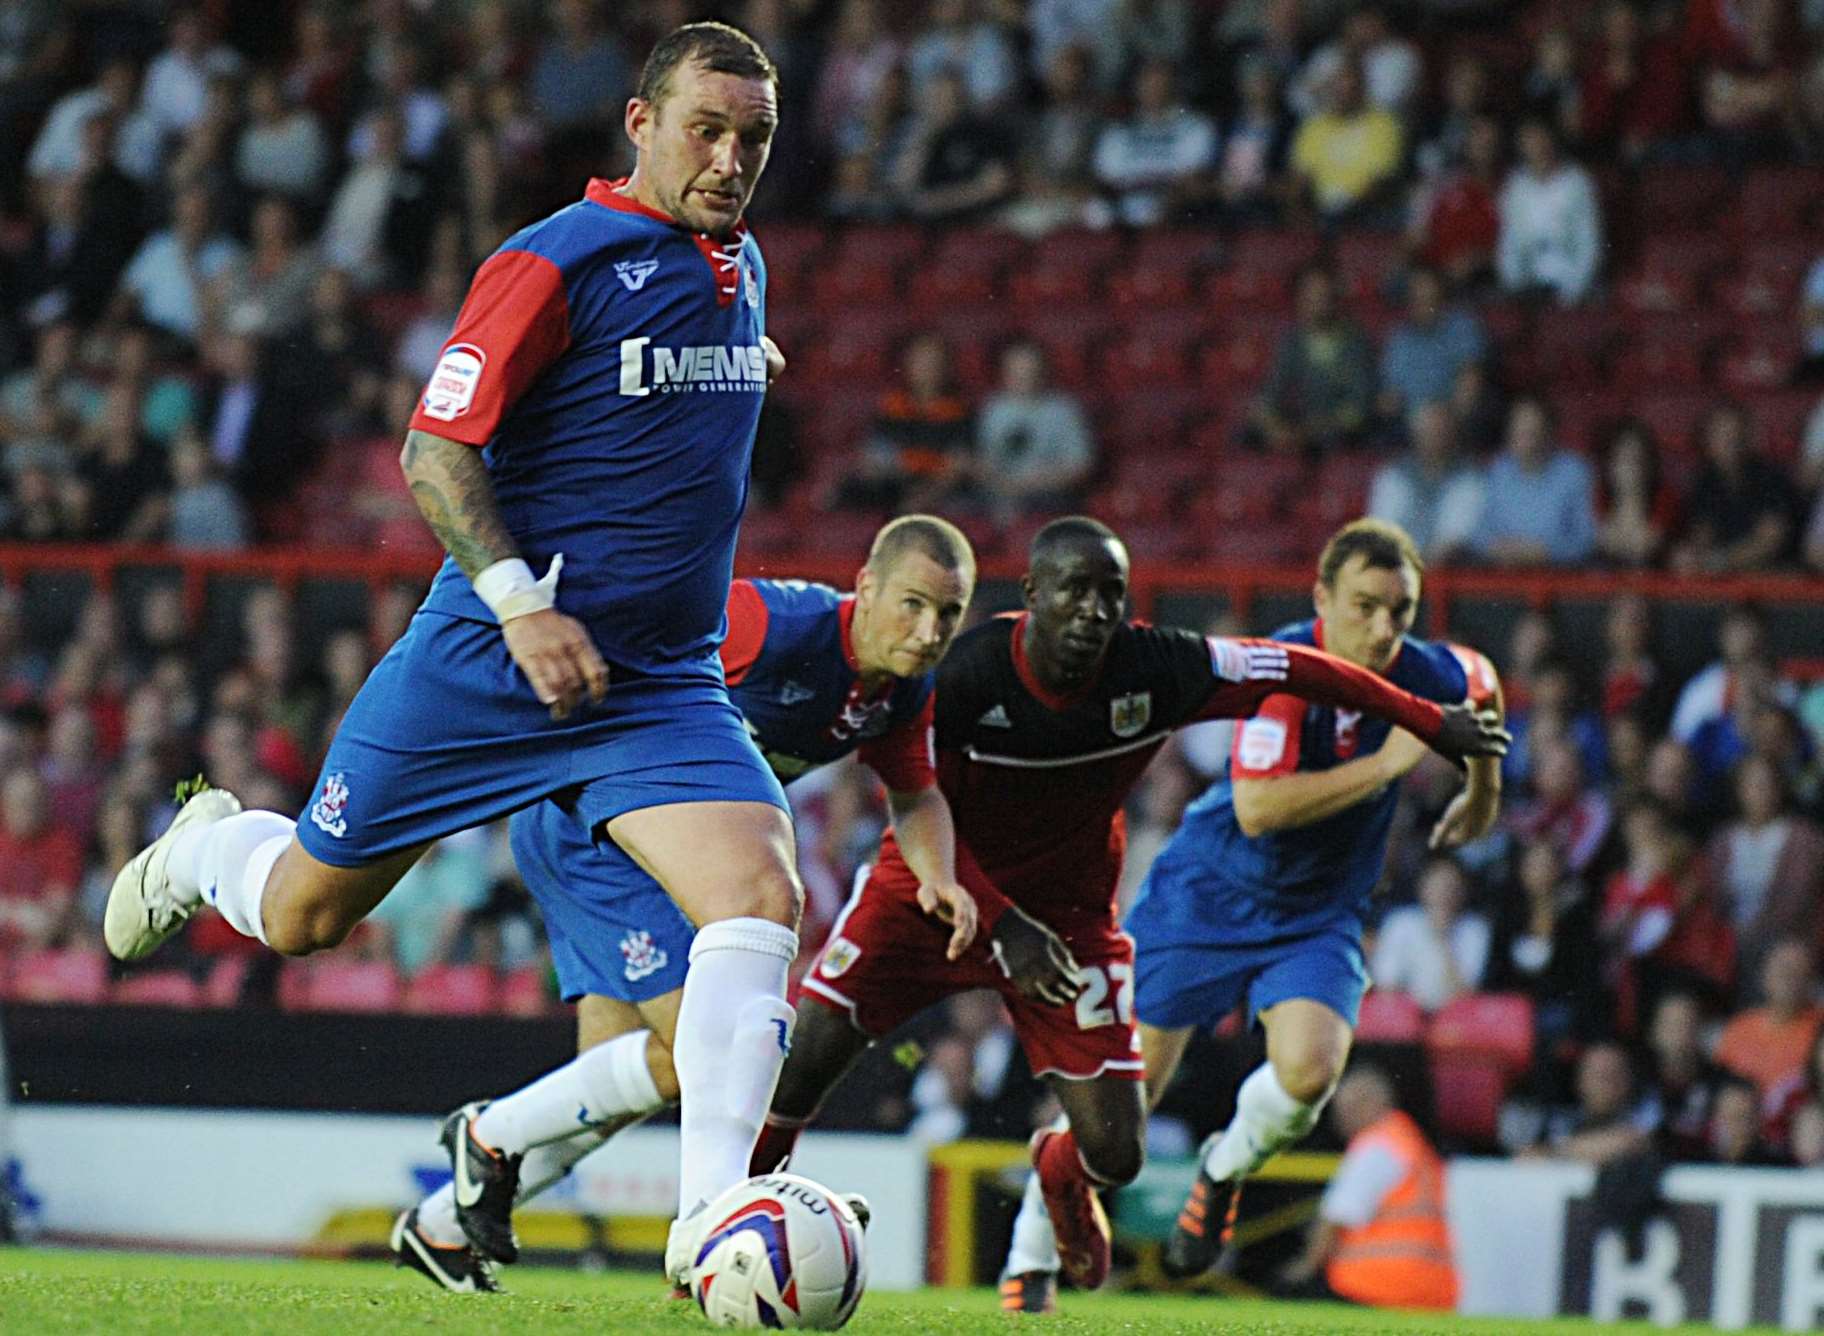 Danny Kedwell fires home from the spot against Bristol City in 2012. Picture: Barry Goodwin